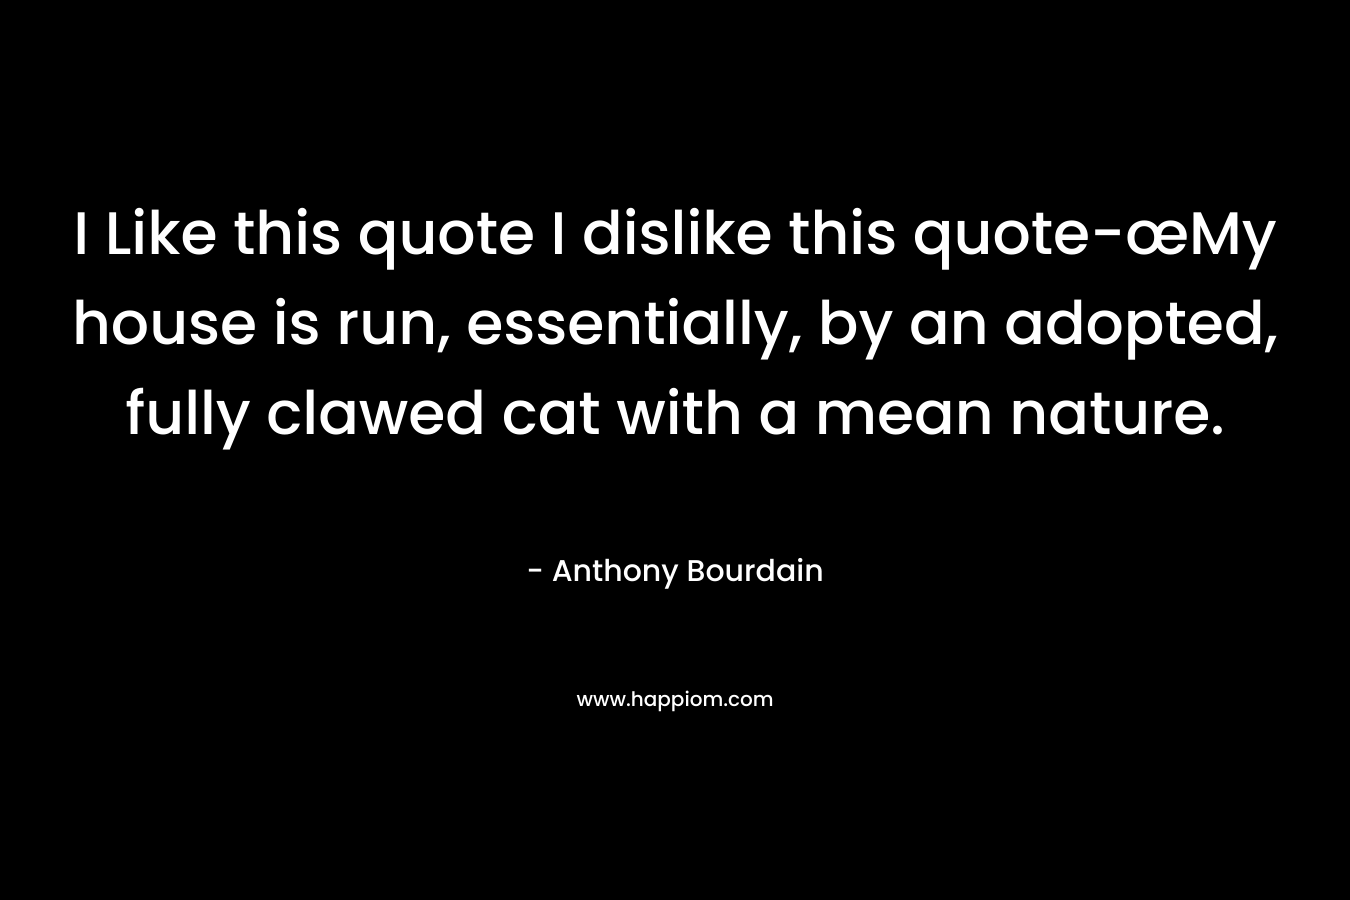 I Like this quote I dislike this quote-œMy house is run, essentially, by an adopted, fully clawed cat with a mean nature. – Anthony Bourdain